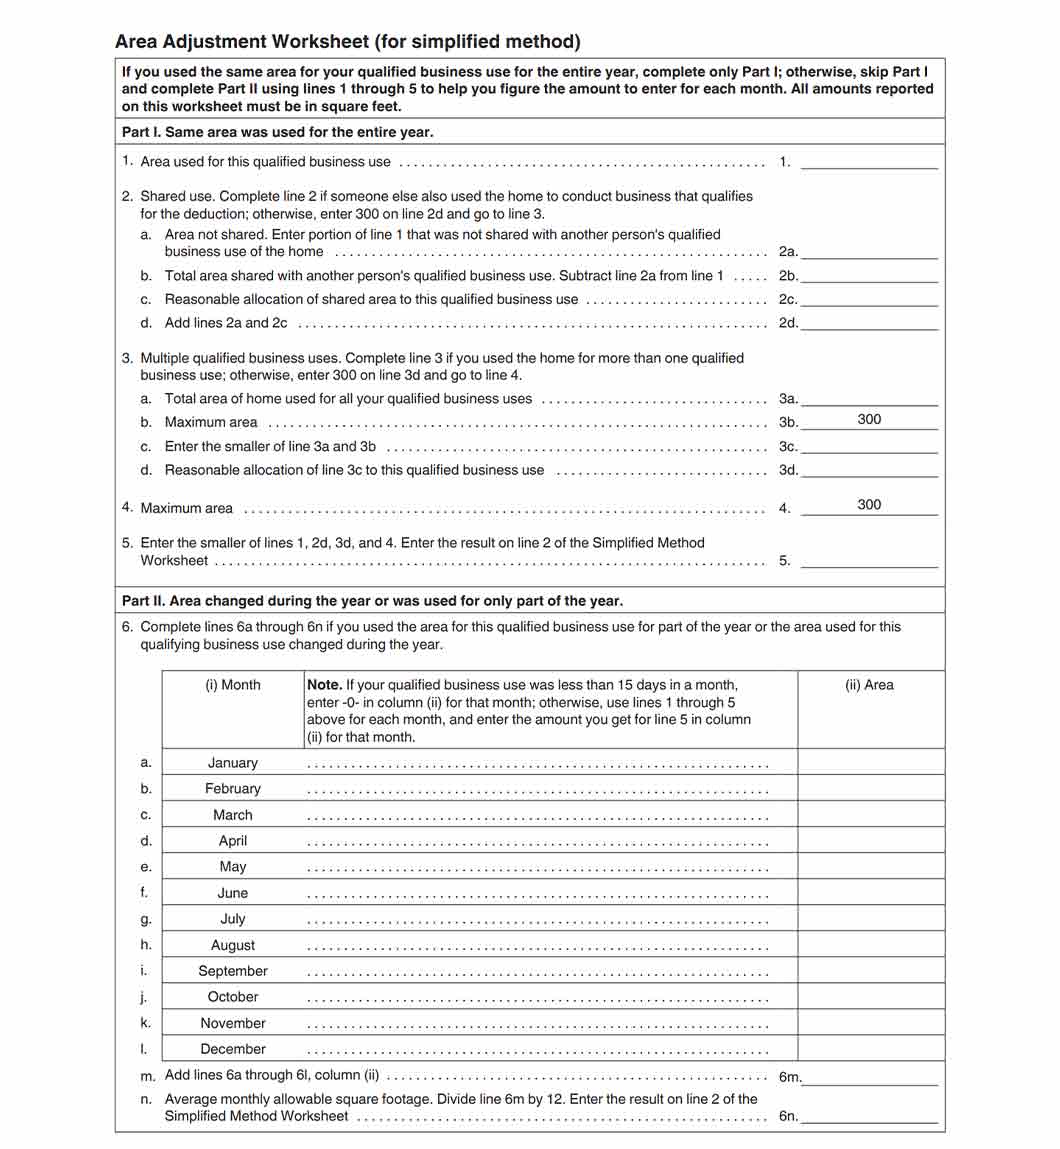 IRS Area Worksheet for the simplified method of the\ home office tax deduction